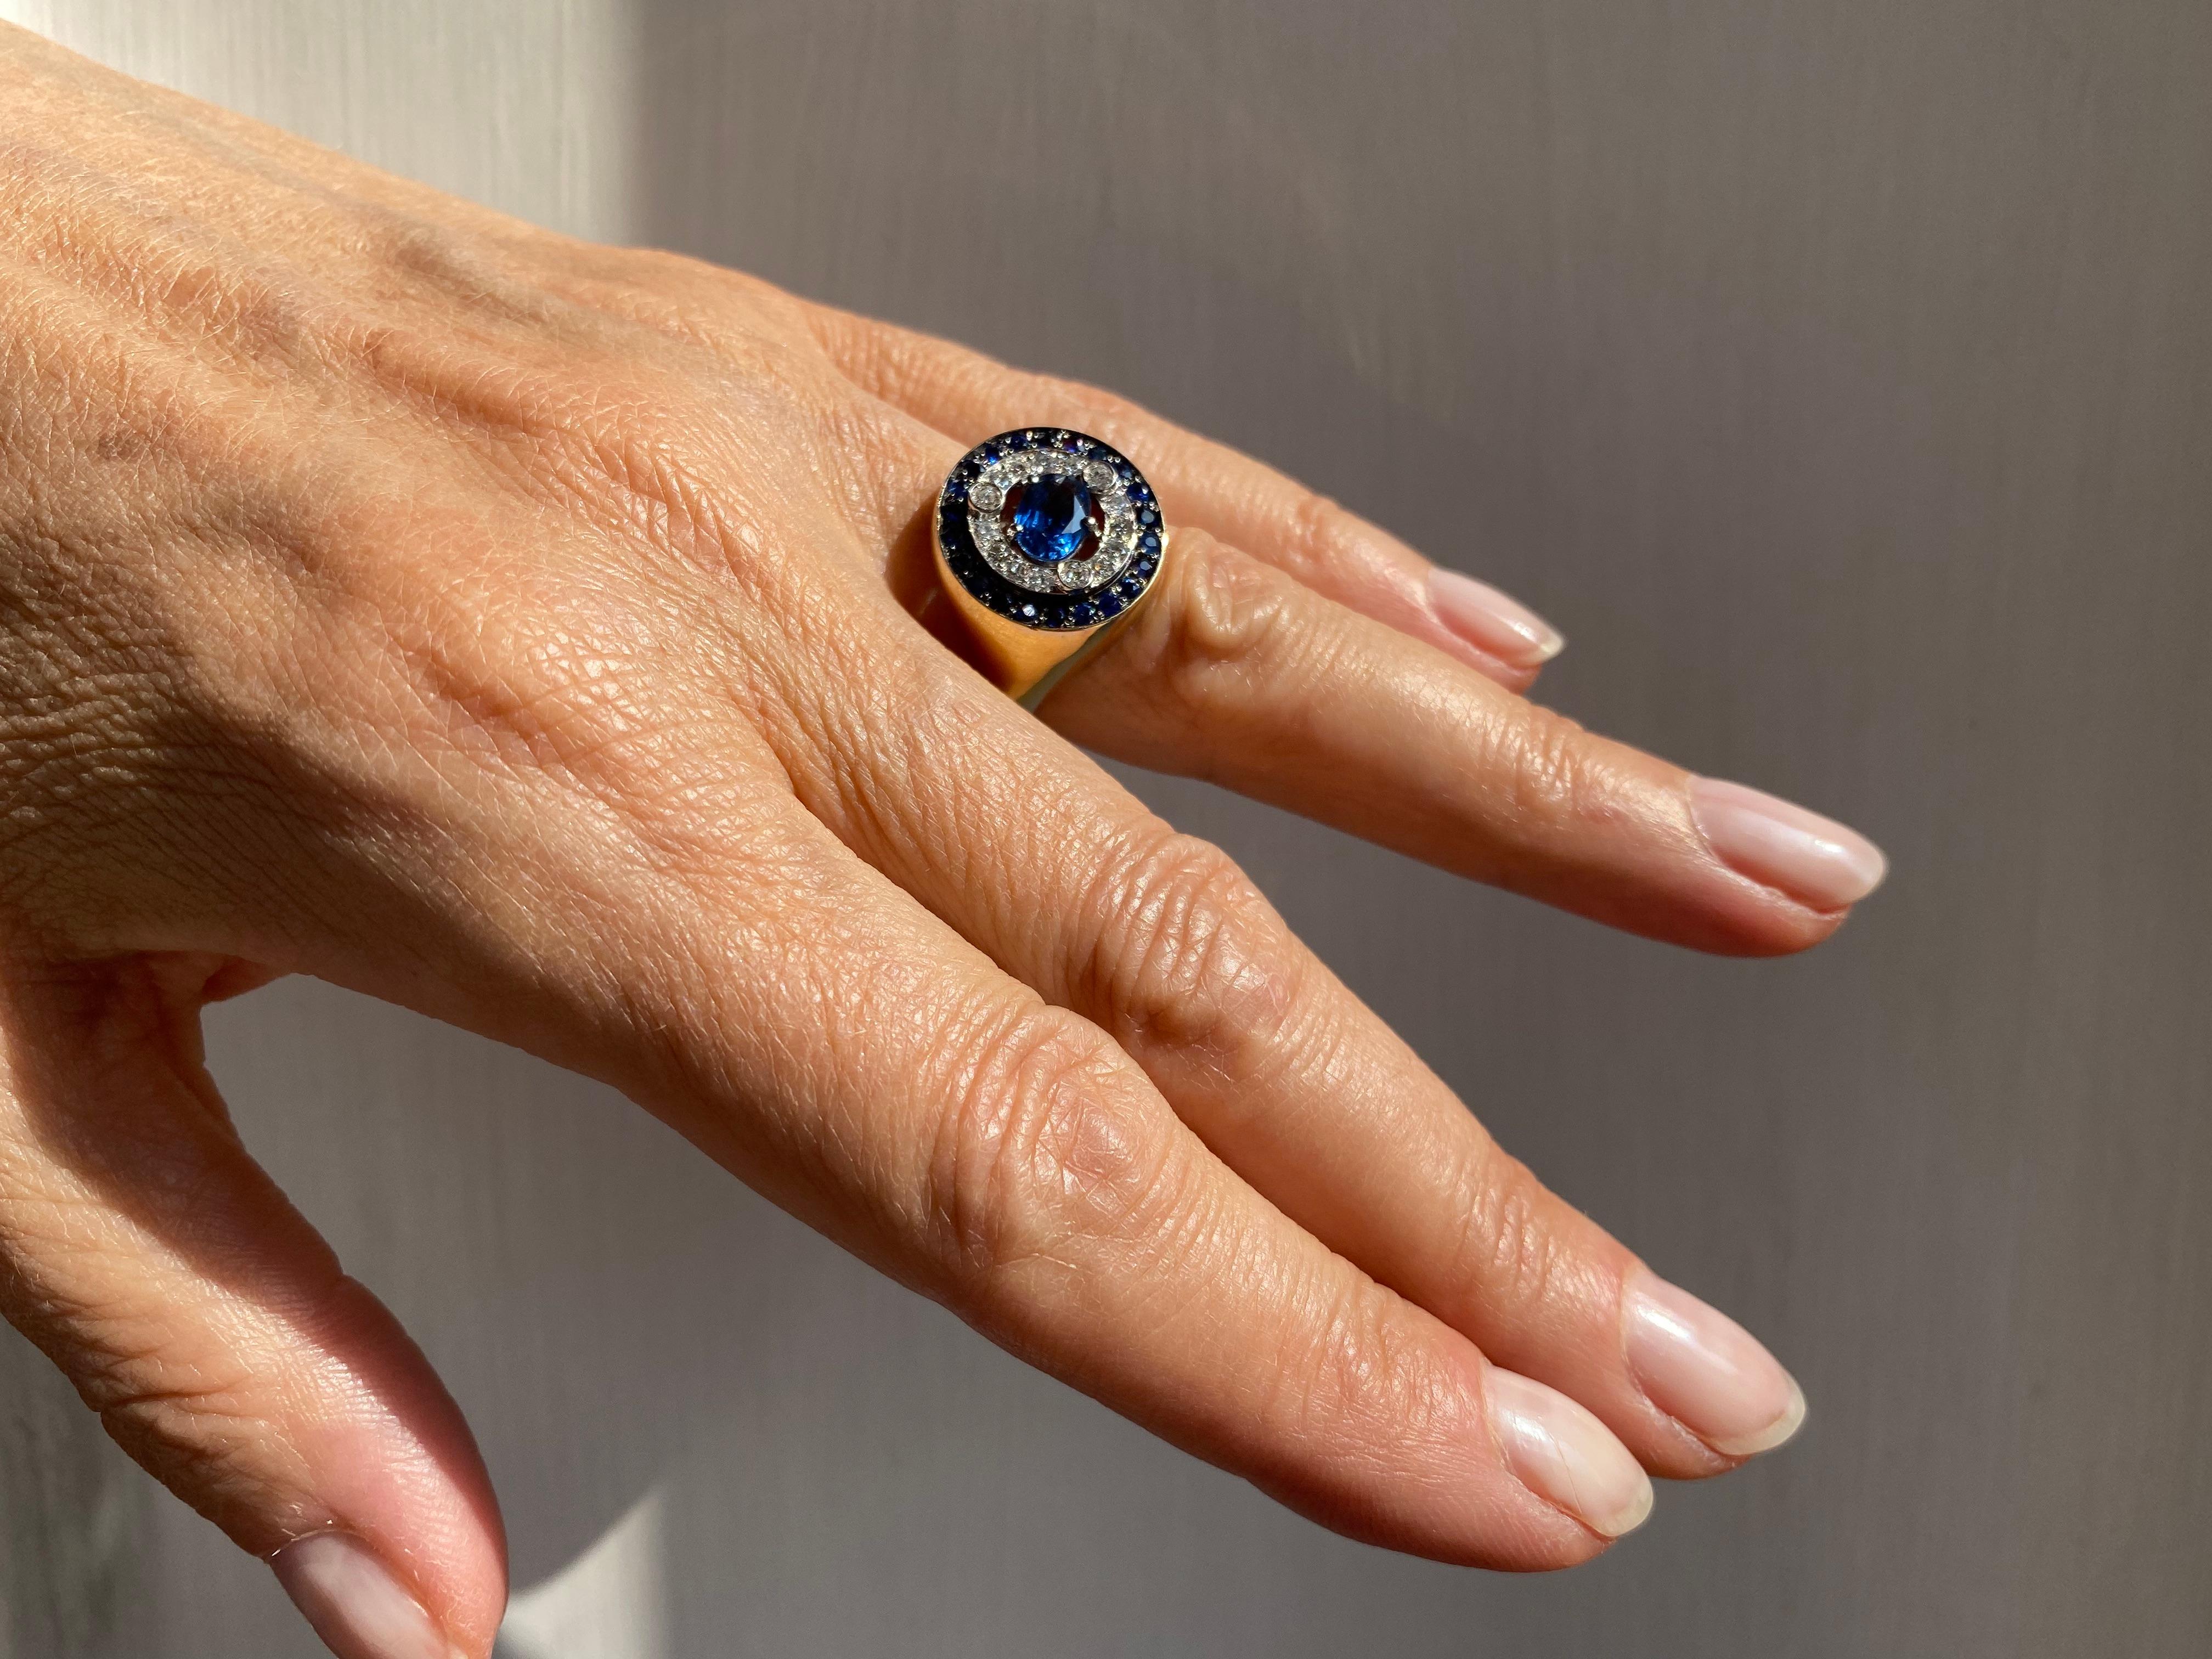 This stunning Unisex Modern Ring designed by Rossella Ugolini features a captivating design inspired by the Helix Nebula, a planetary nebula located in the constellation of the Aquarius.
Handcrafted in Italy with exquisite attention to detail, this